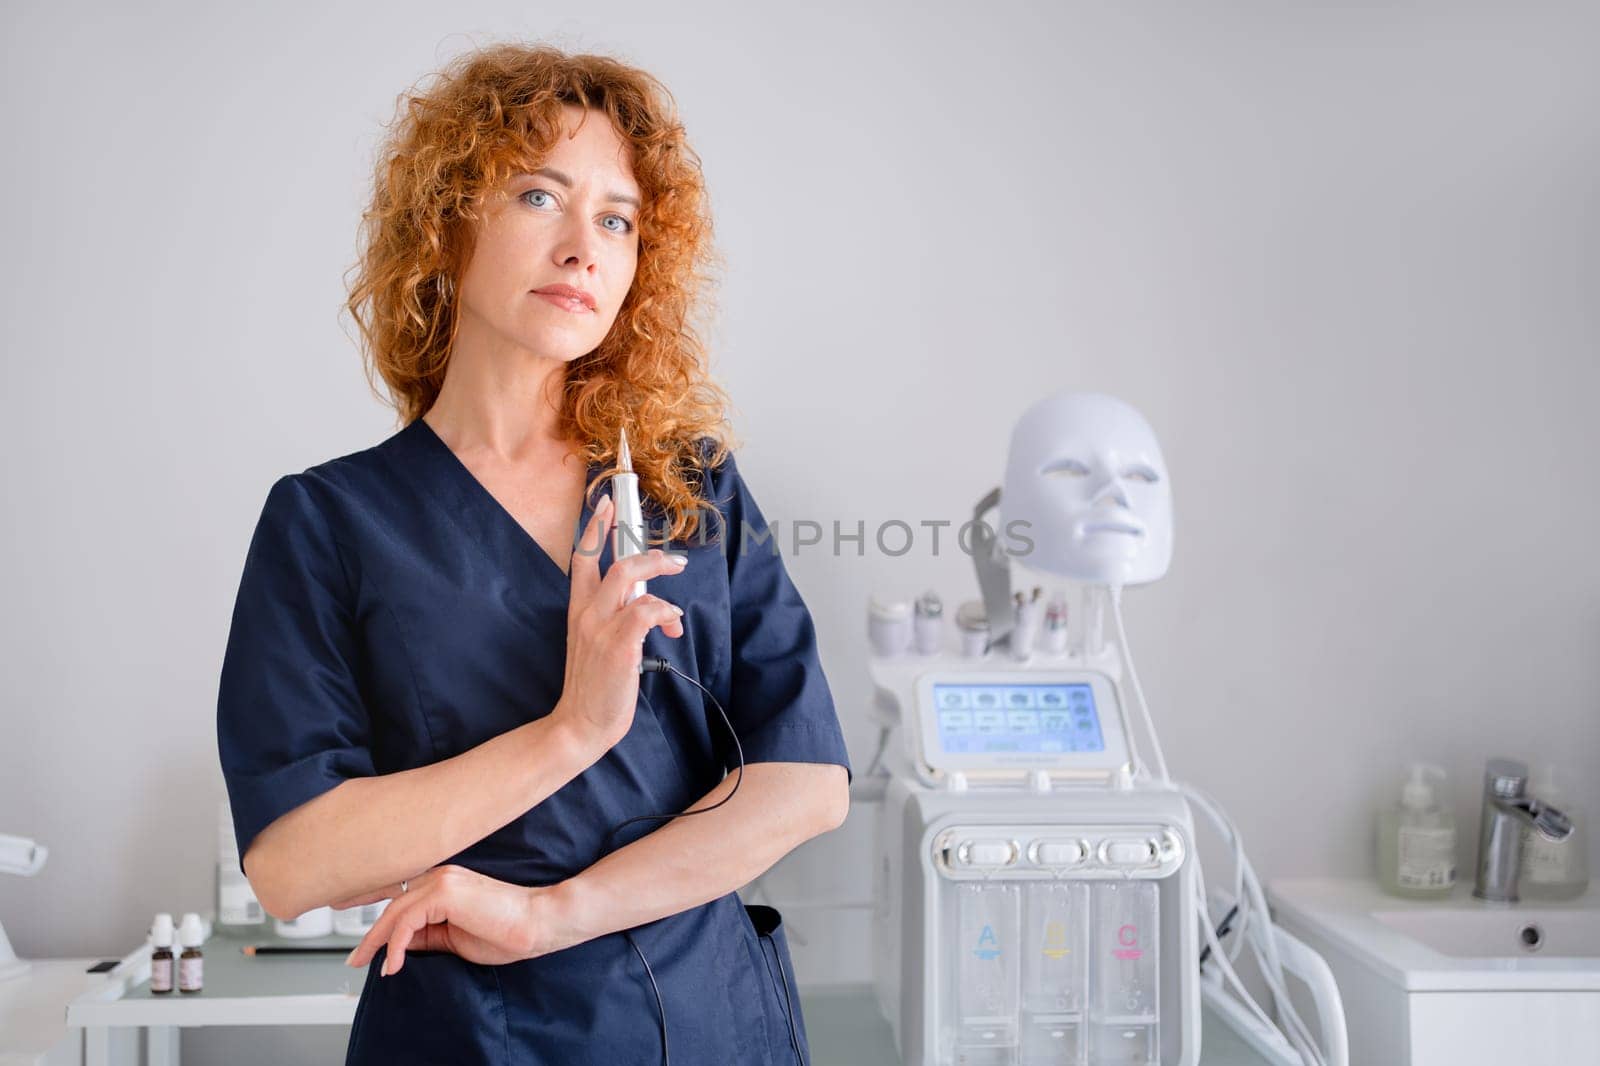 Woman cosmetologist standing hold device and looking at camera in beauty spa salon. Female dermatologist, skin therapist, beautician skincare professional in clean white coat uniform